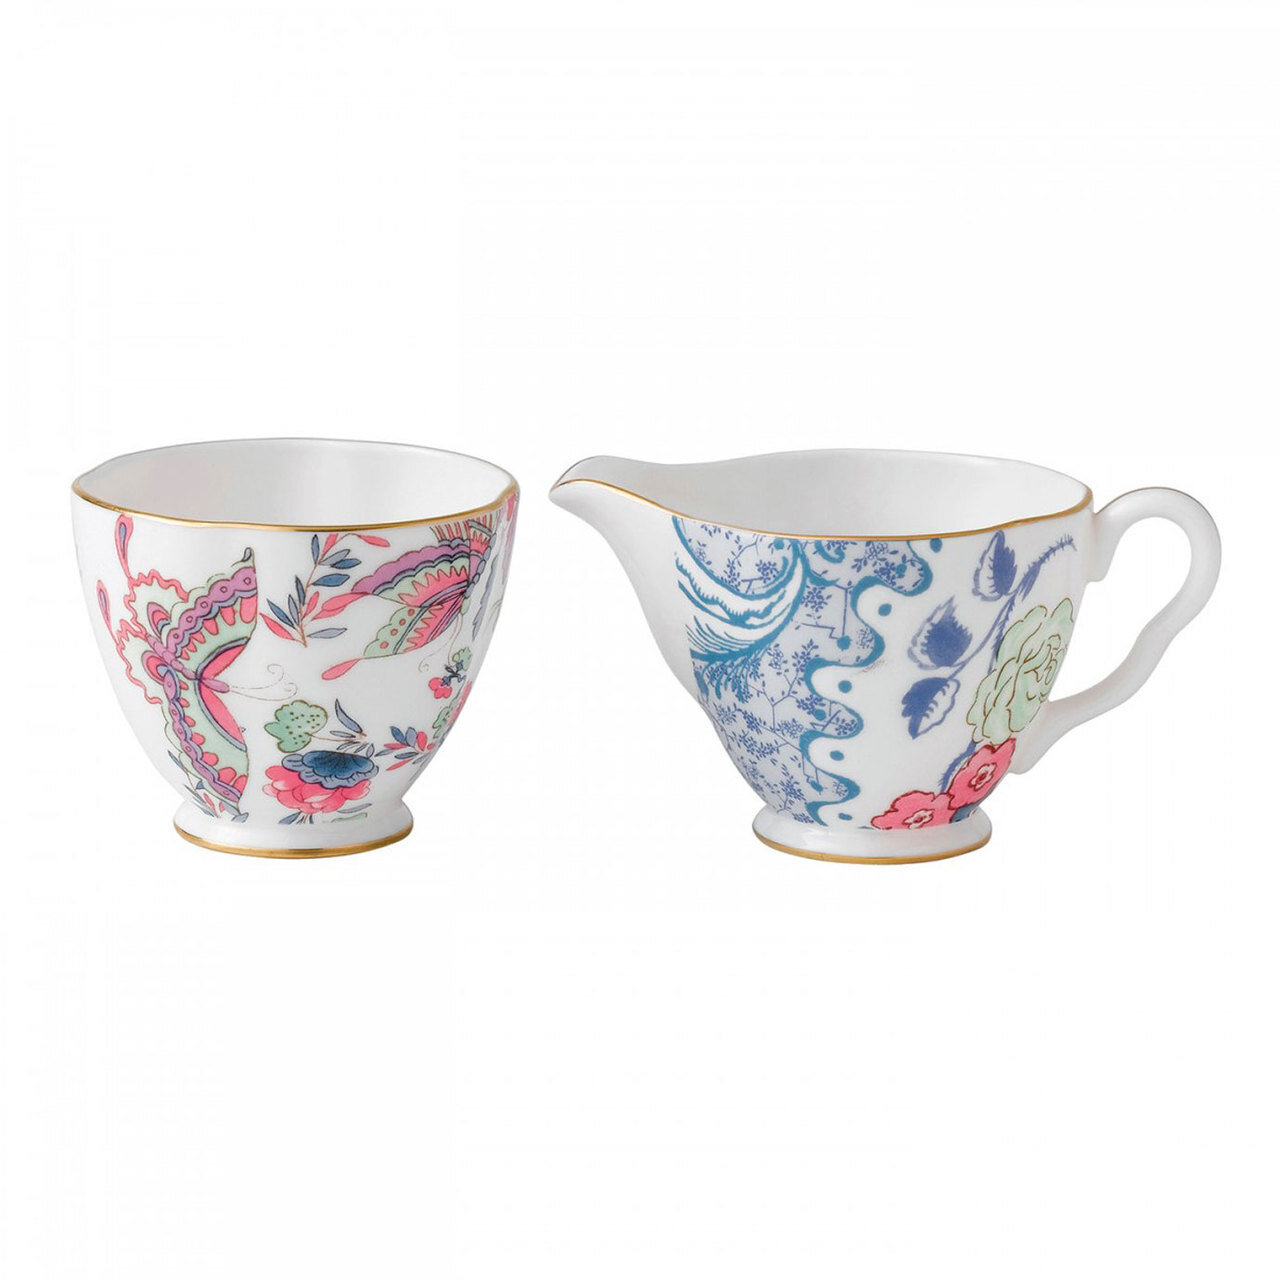 Wedgwood Butterfly Bloom Cream and Sugar Set L/S